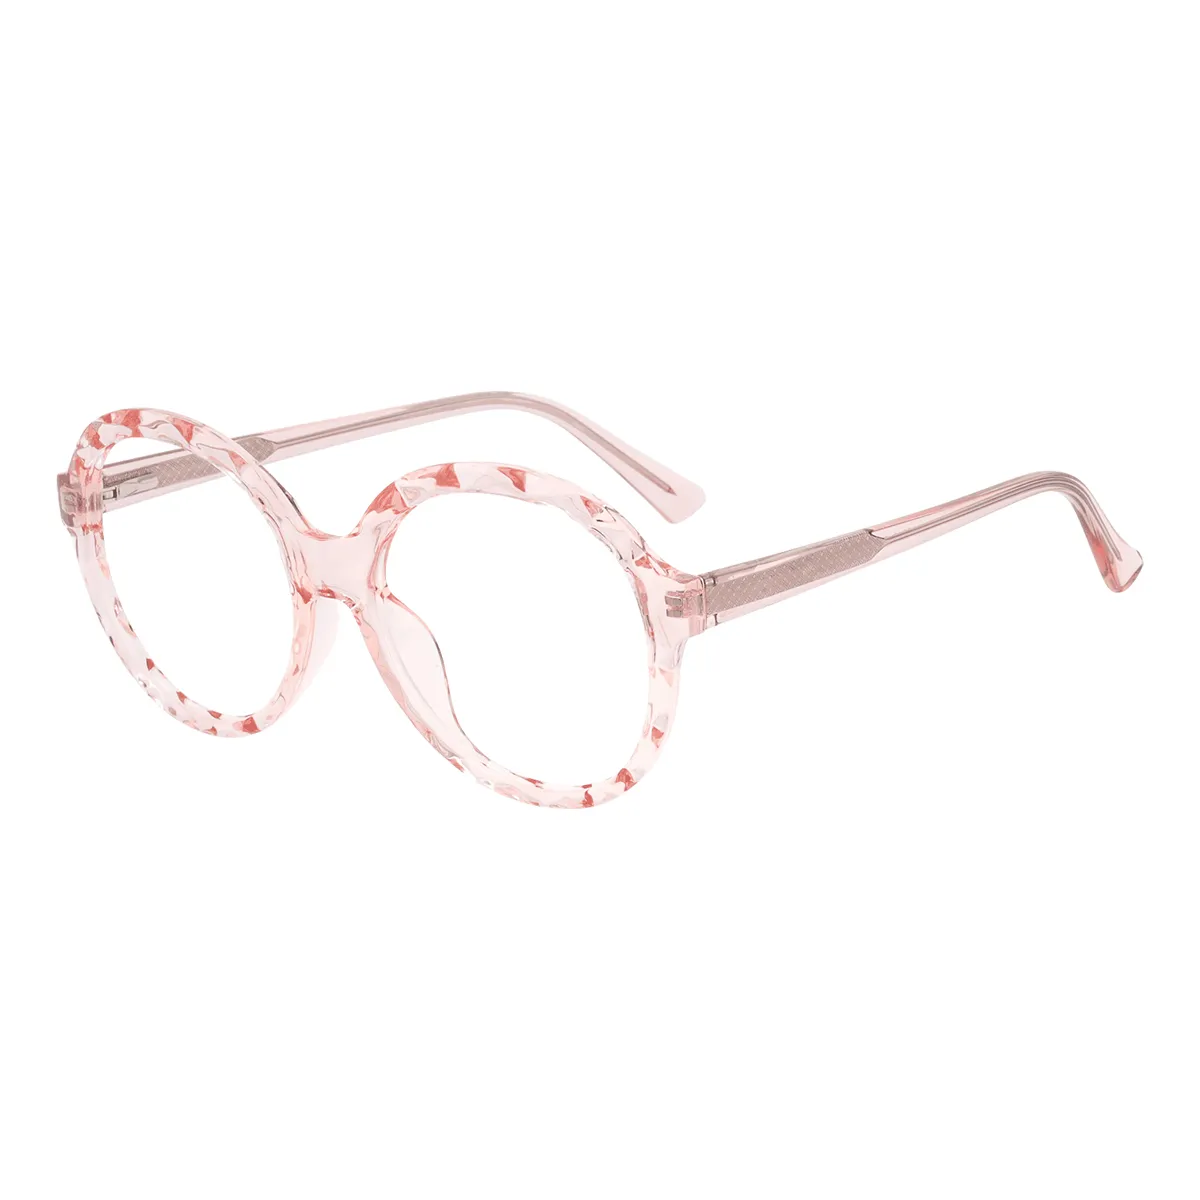 Fashion Round Transparent Reading Glasses for Women